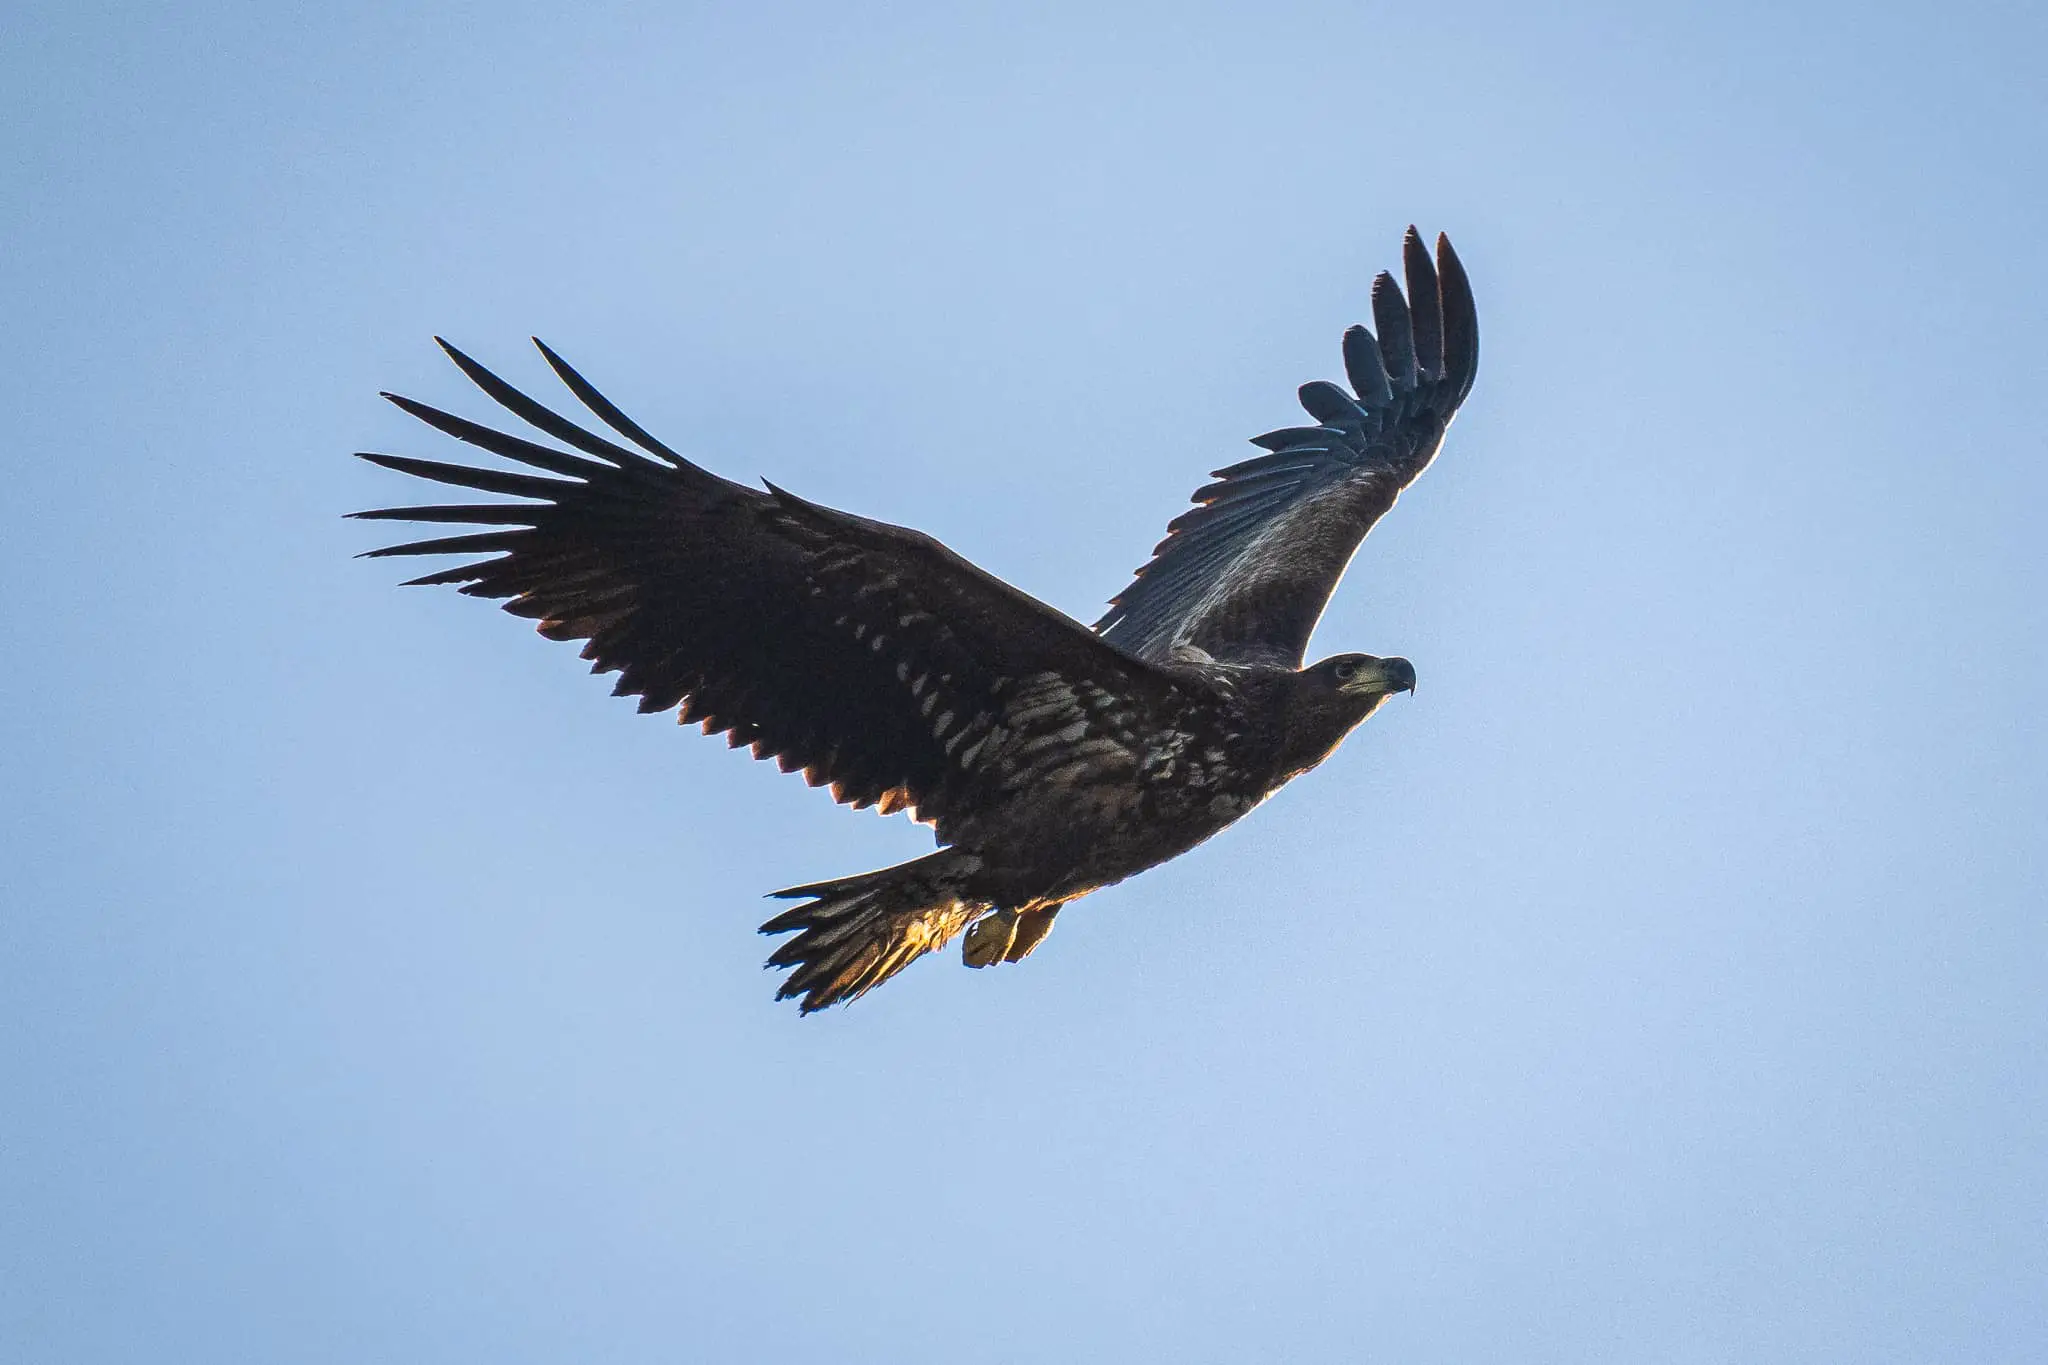 White-tailed Eagle in the sky by Ainsley Bennett